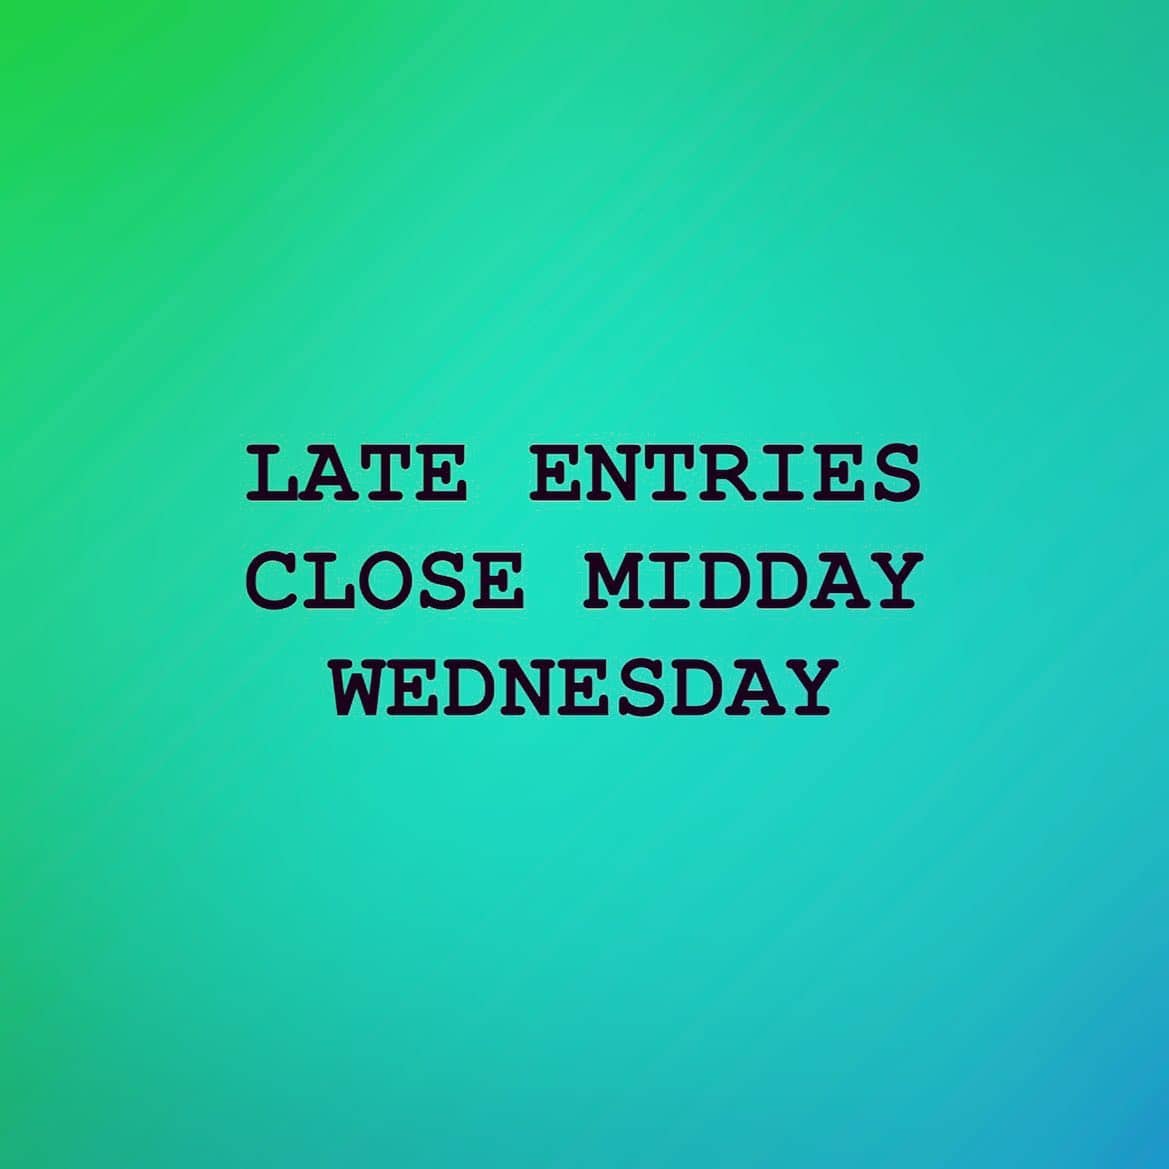 Late entries will close at midday Wednesday for us to start printing entry lists and provide cate...